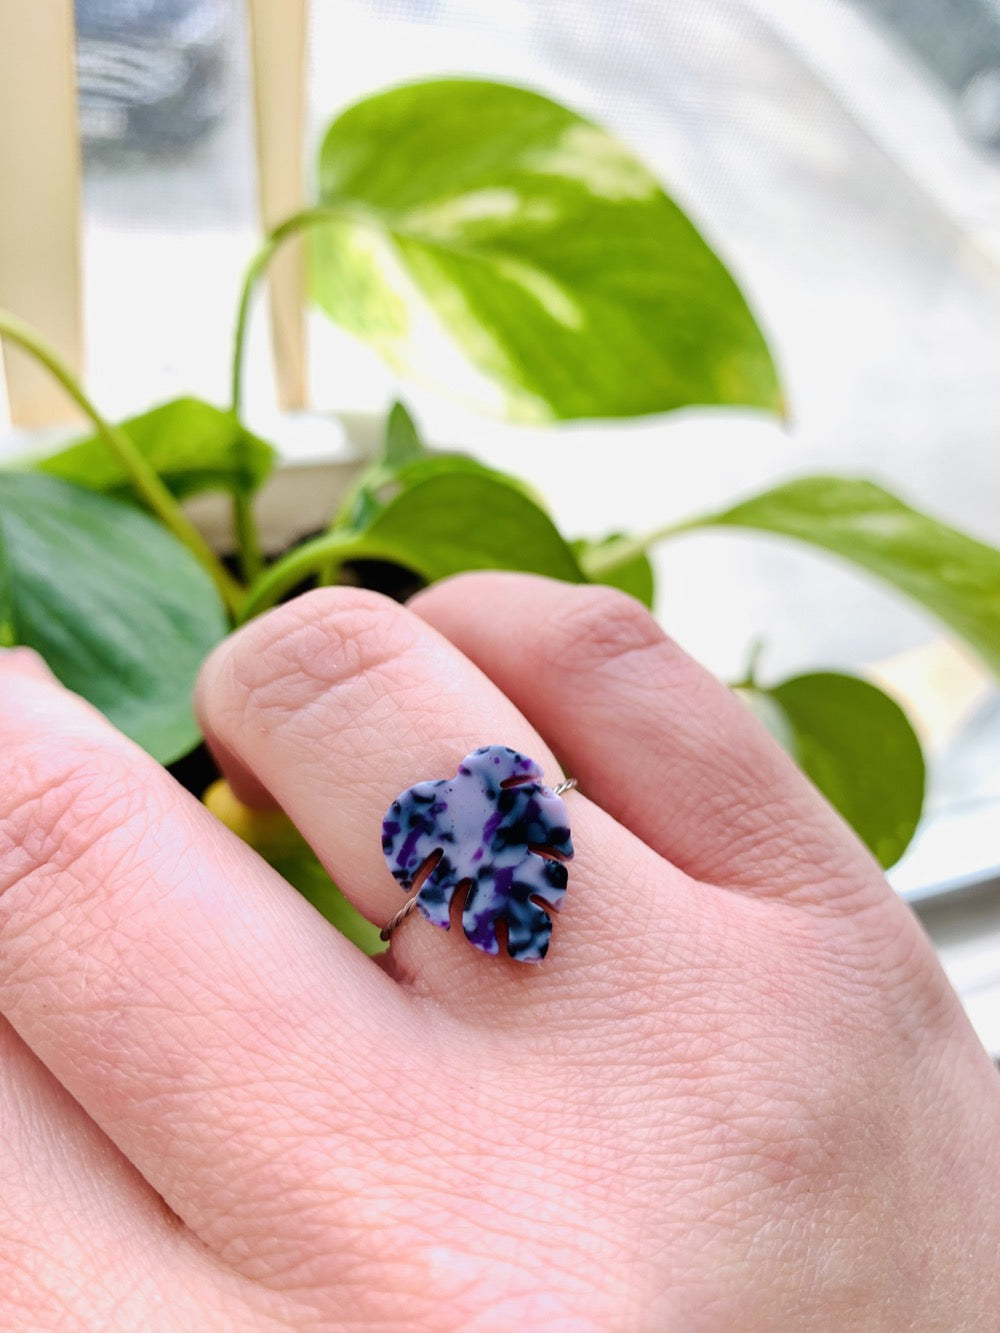 In the foreground is a hand wearing a cast ring in the shape of a monstera leaf. It is cast from recycled 3D prints in hues of purple, black and white. In the background are bright green leafs. 